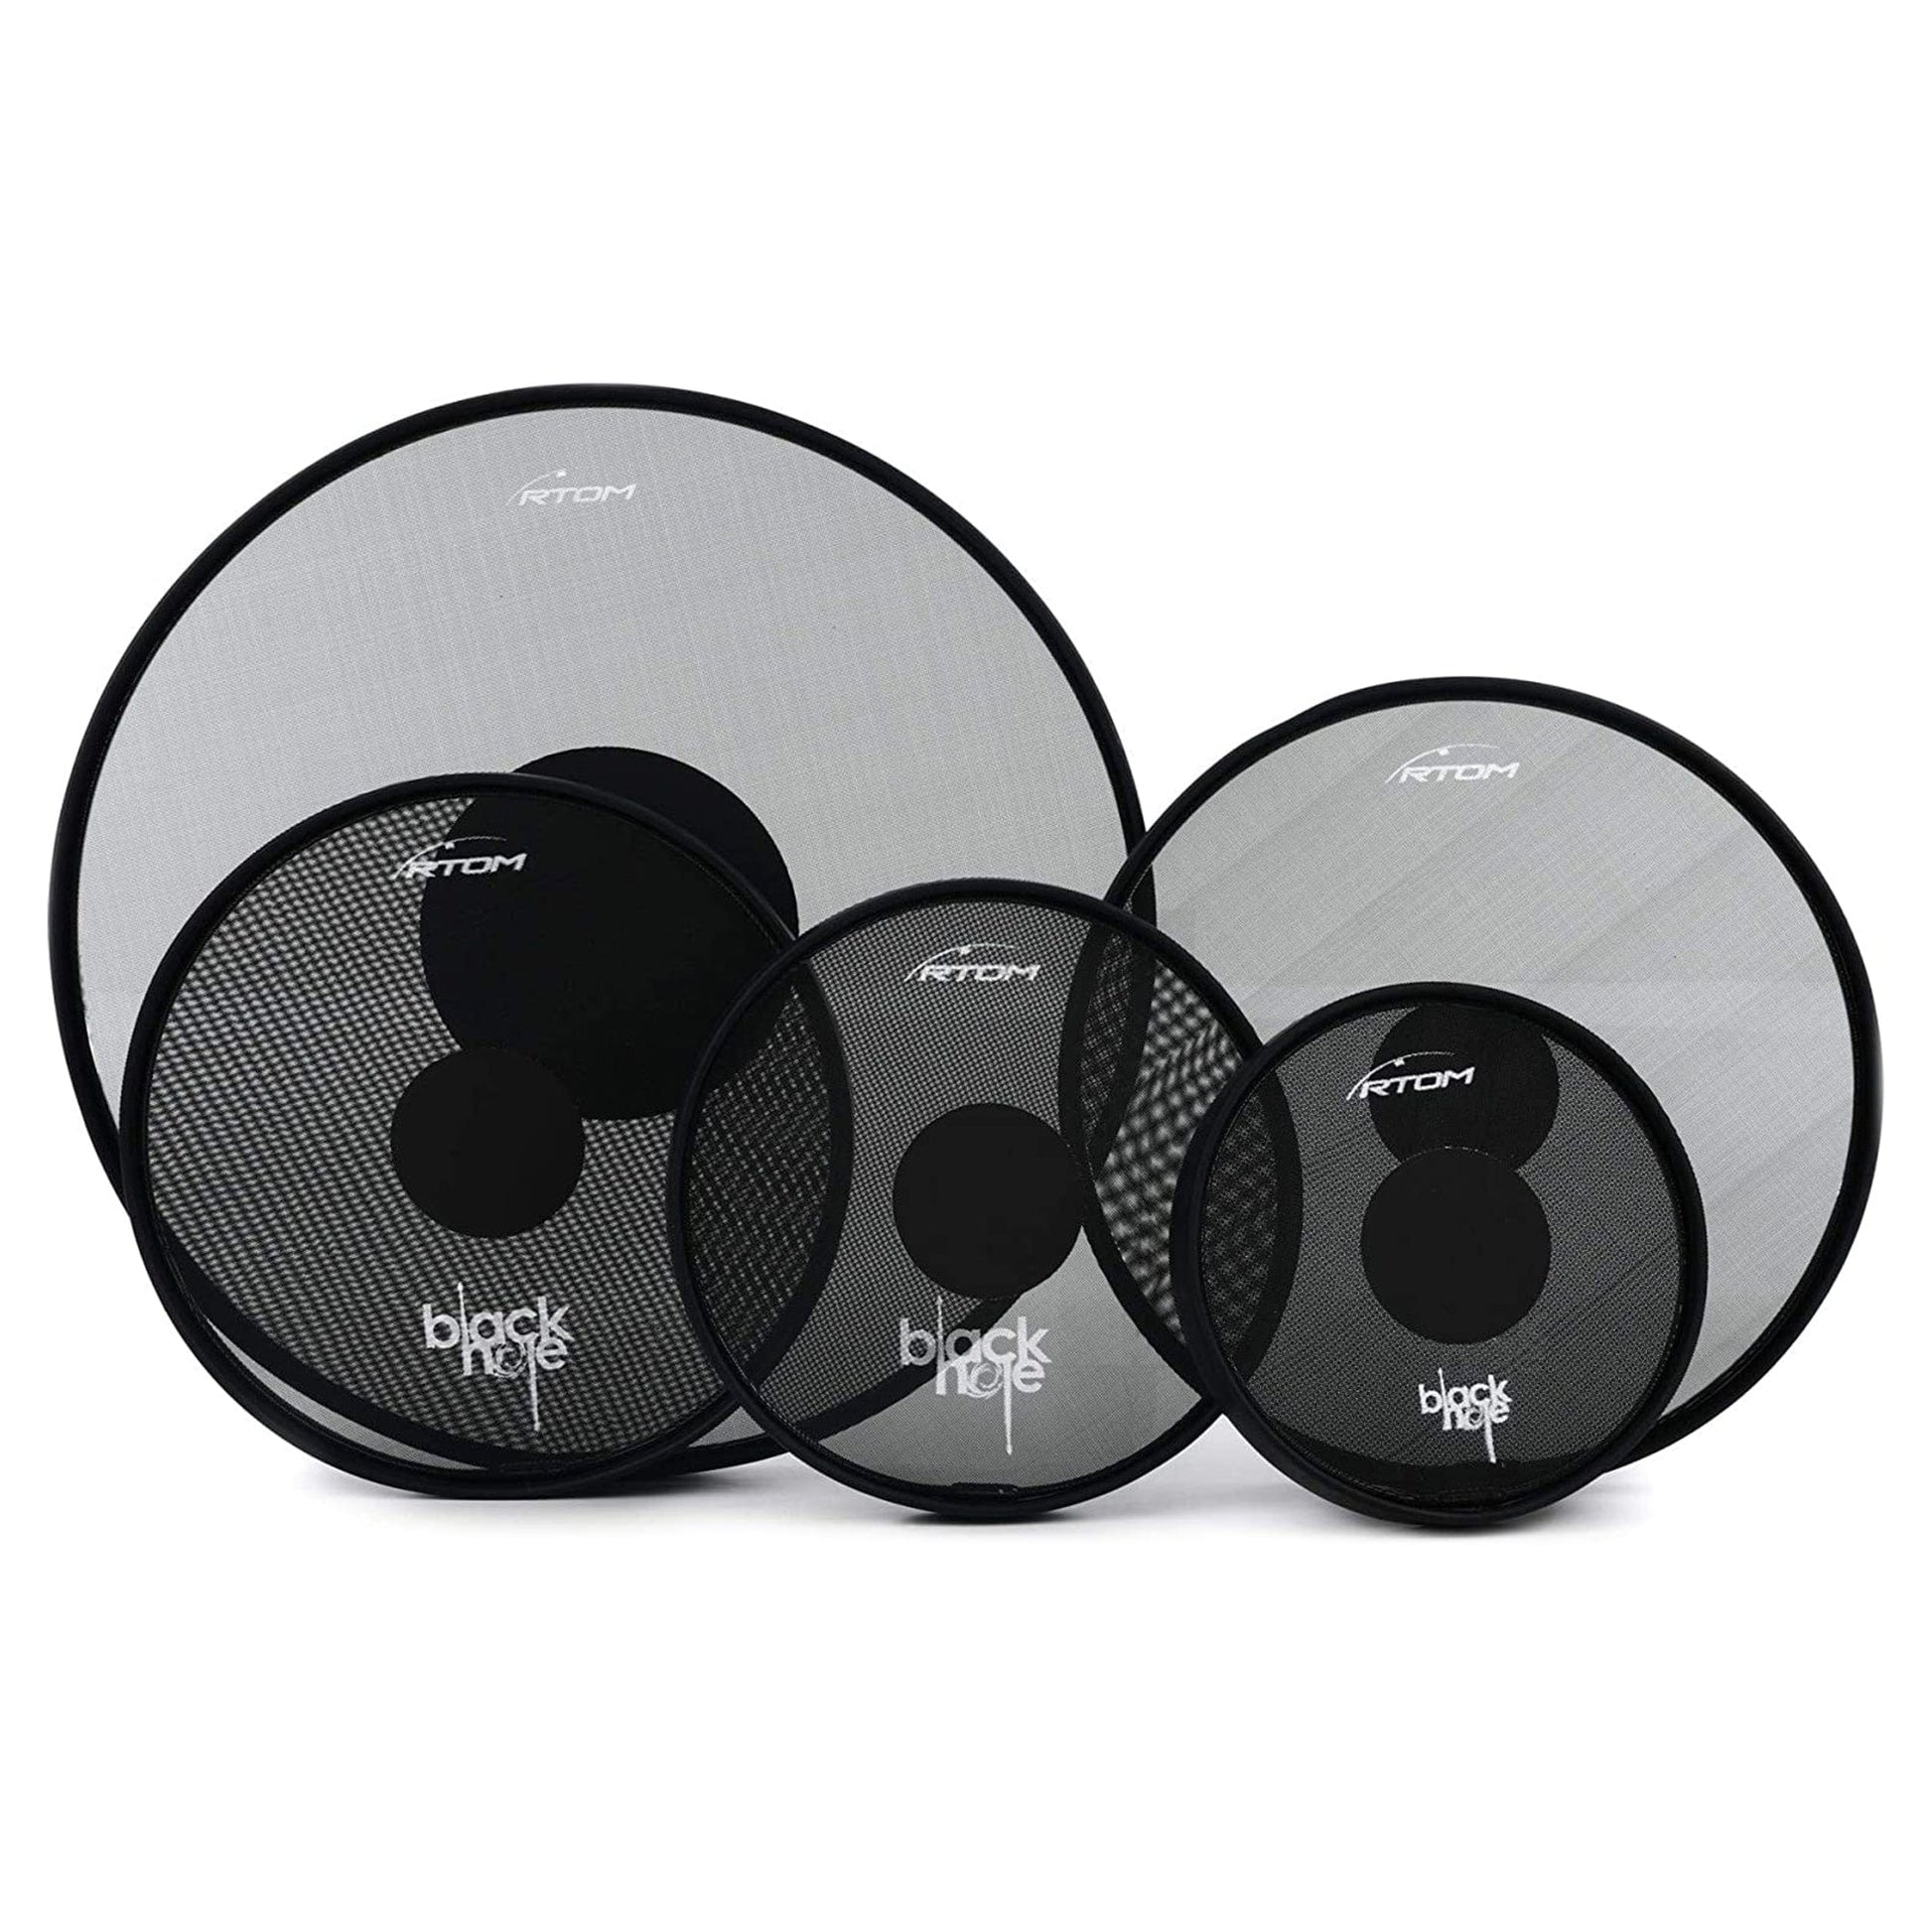 RTOM 10/12/14/16/22" Black Hole Practice Pad Set Drums and Percussion / Practice Pads